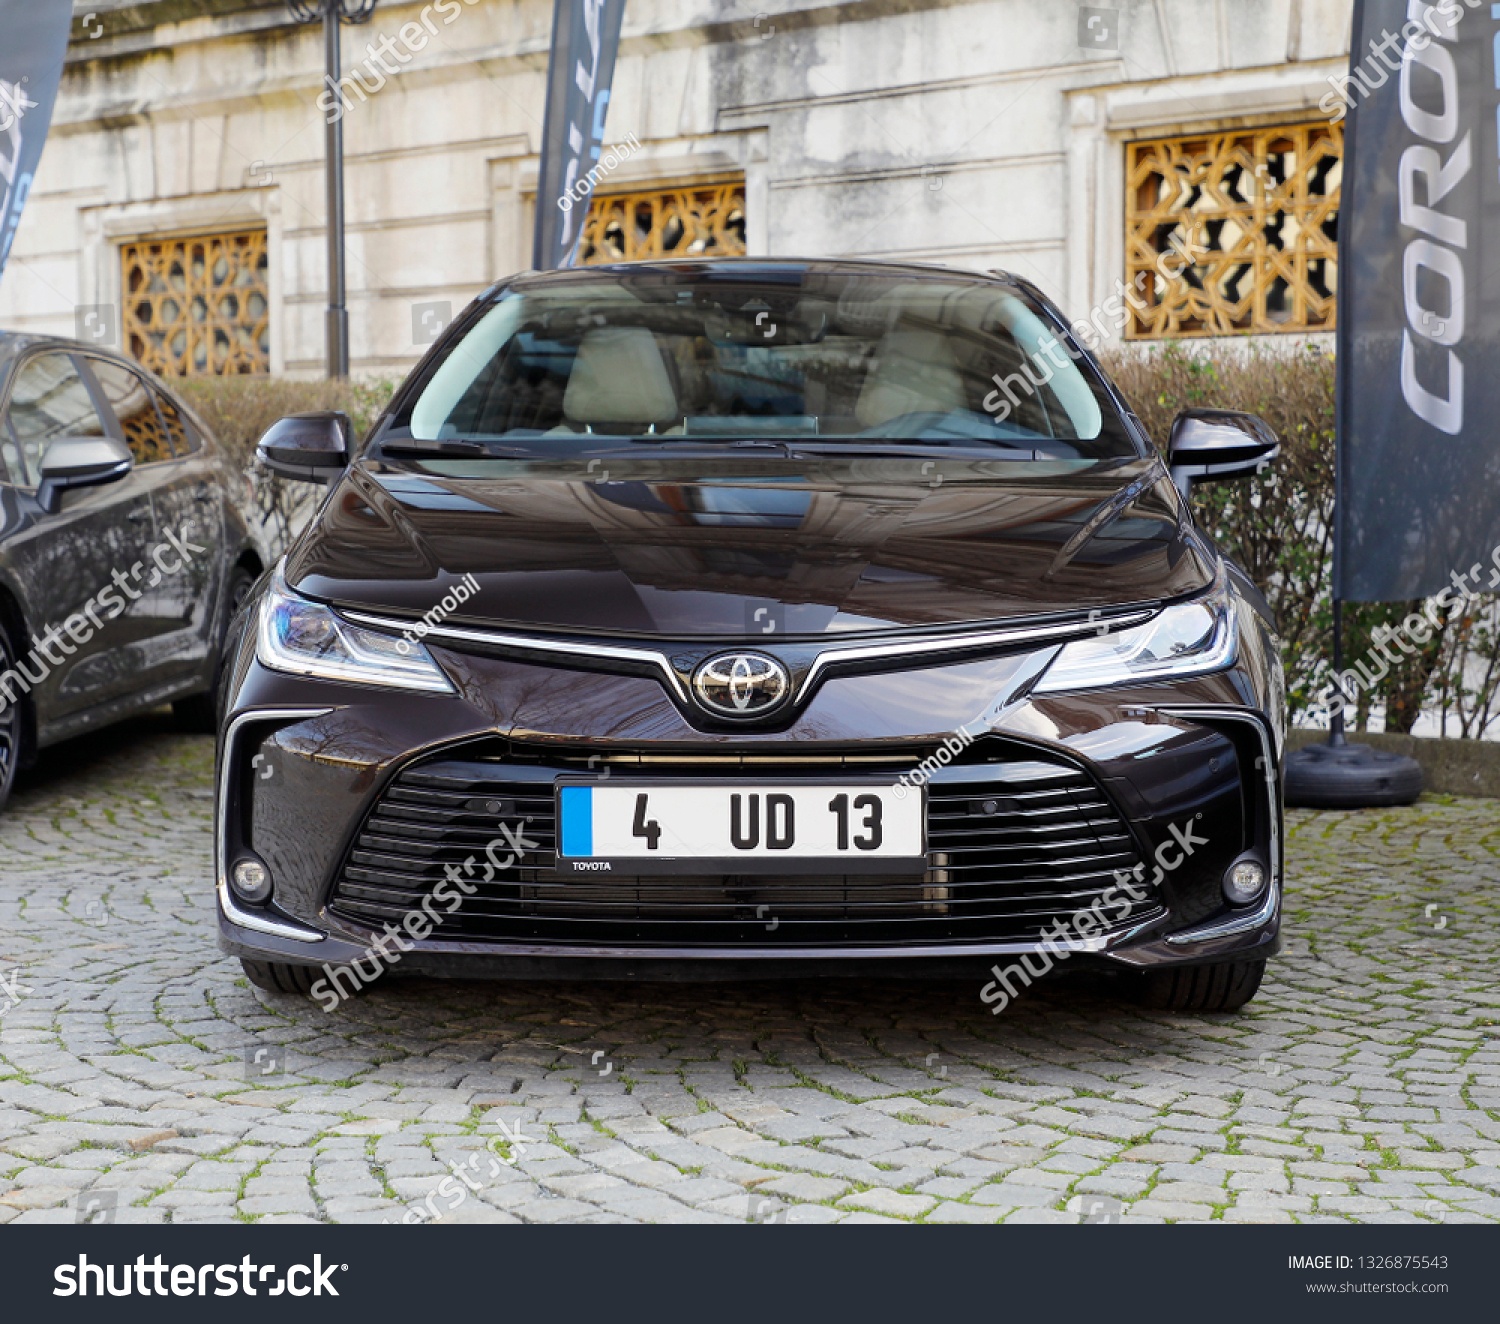 Istanbul March 01 2019 Toyota Corolla Stock Photo Edit Now